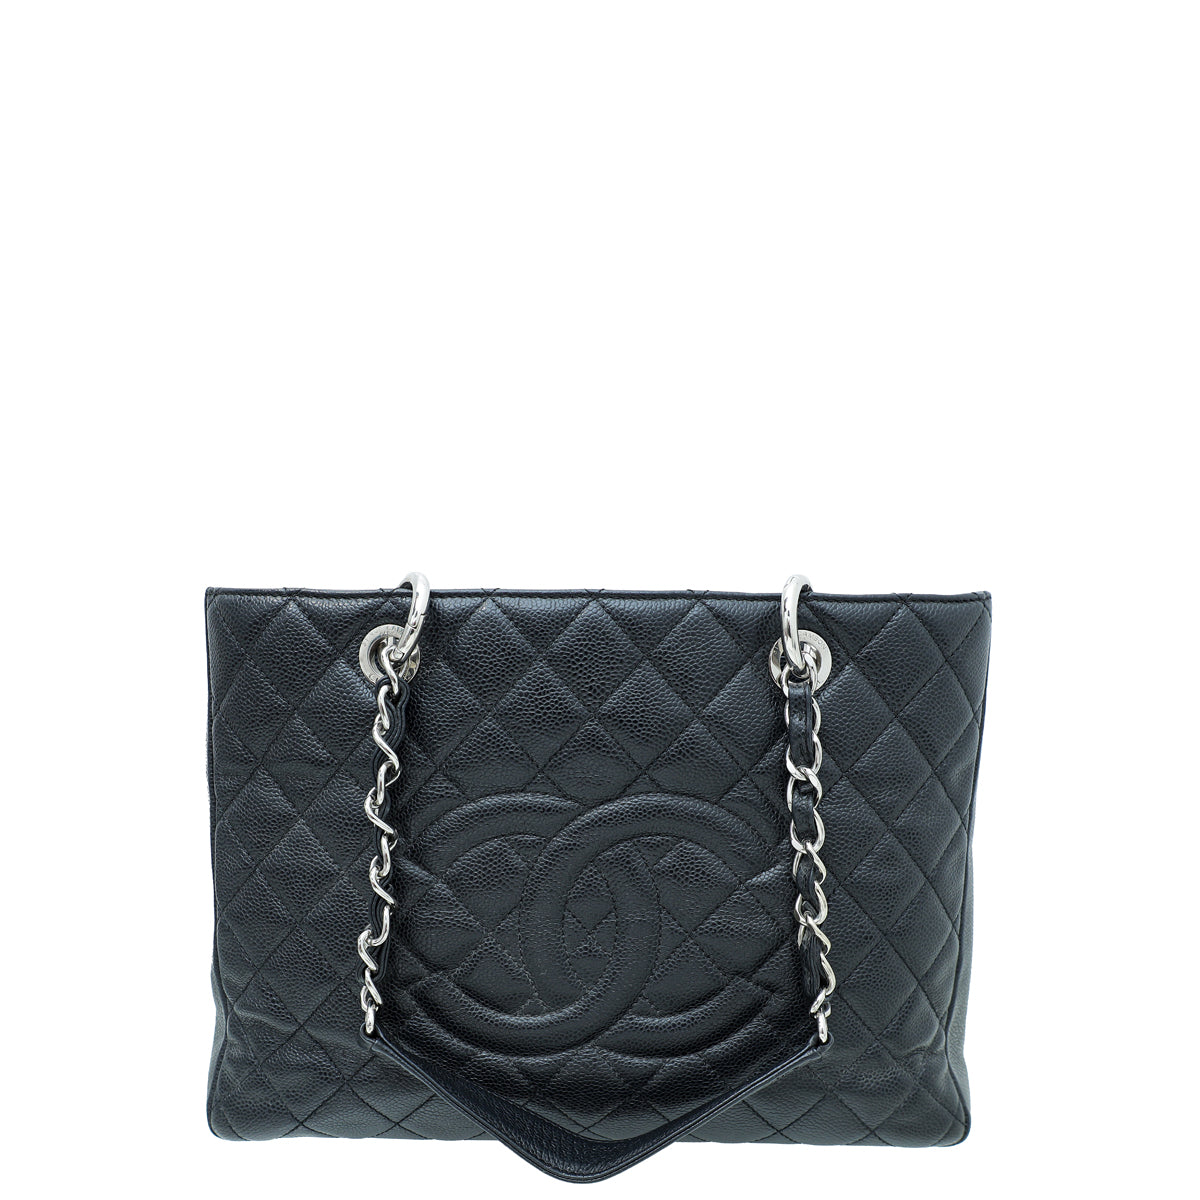 CHANEL Black Caviar Leather Grand Shopping Tote Bag-US